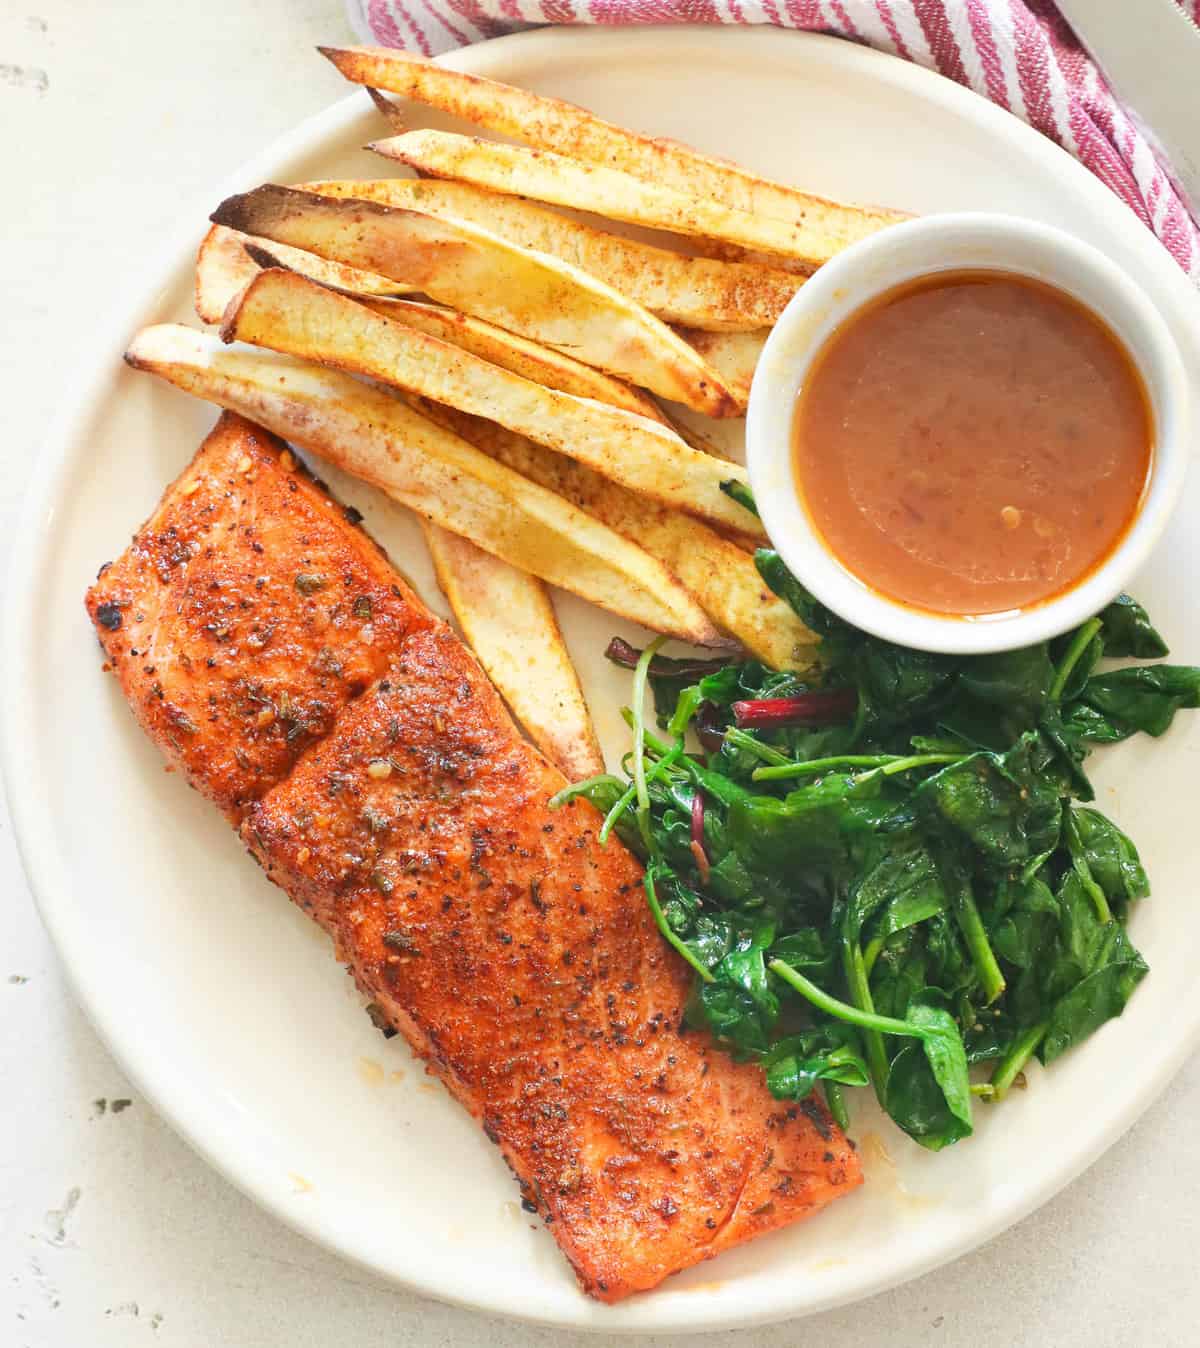 Jerk salmon with crispy jerk fries and wilted spinach